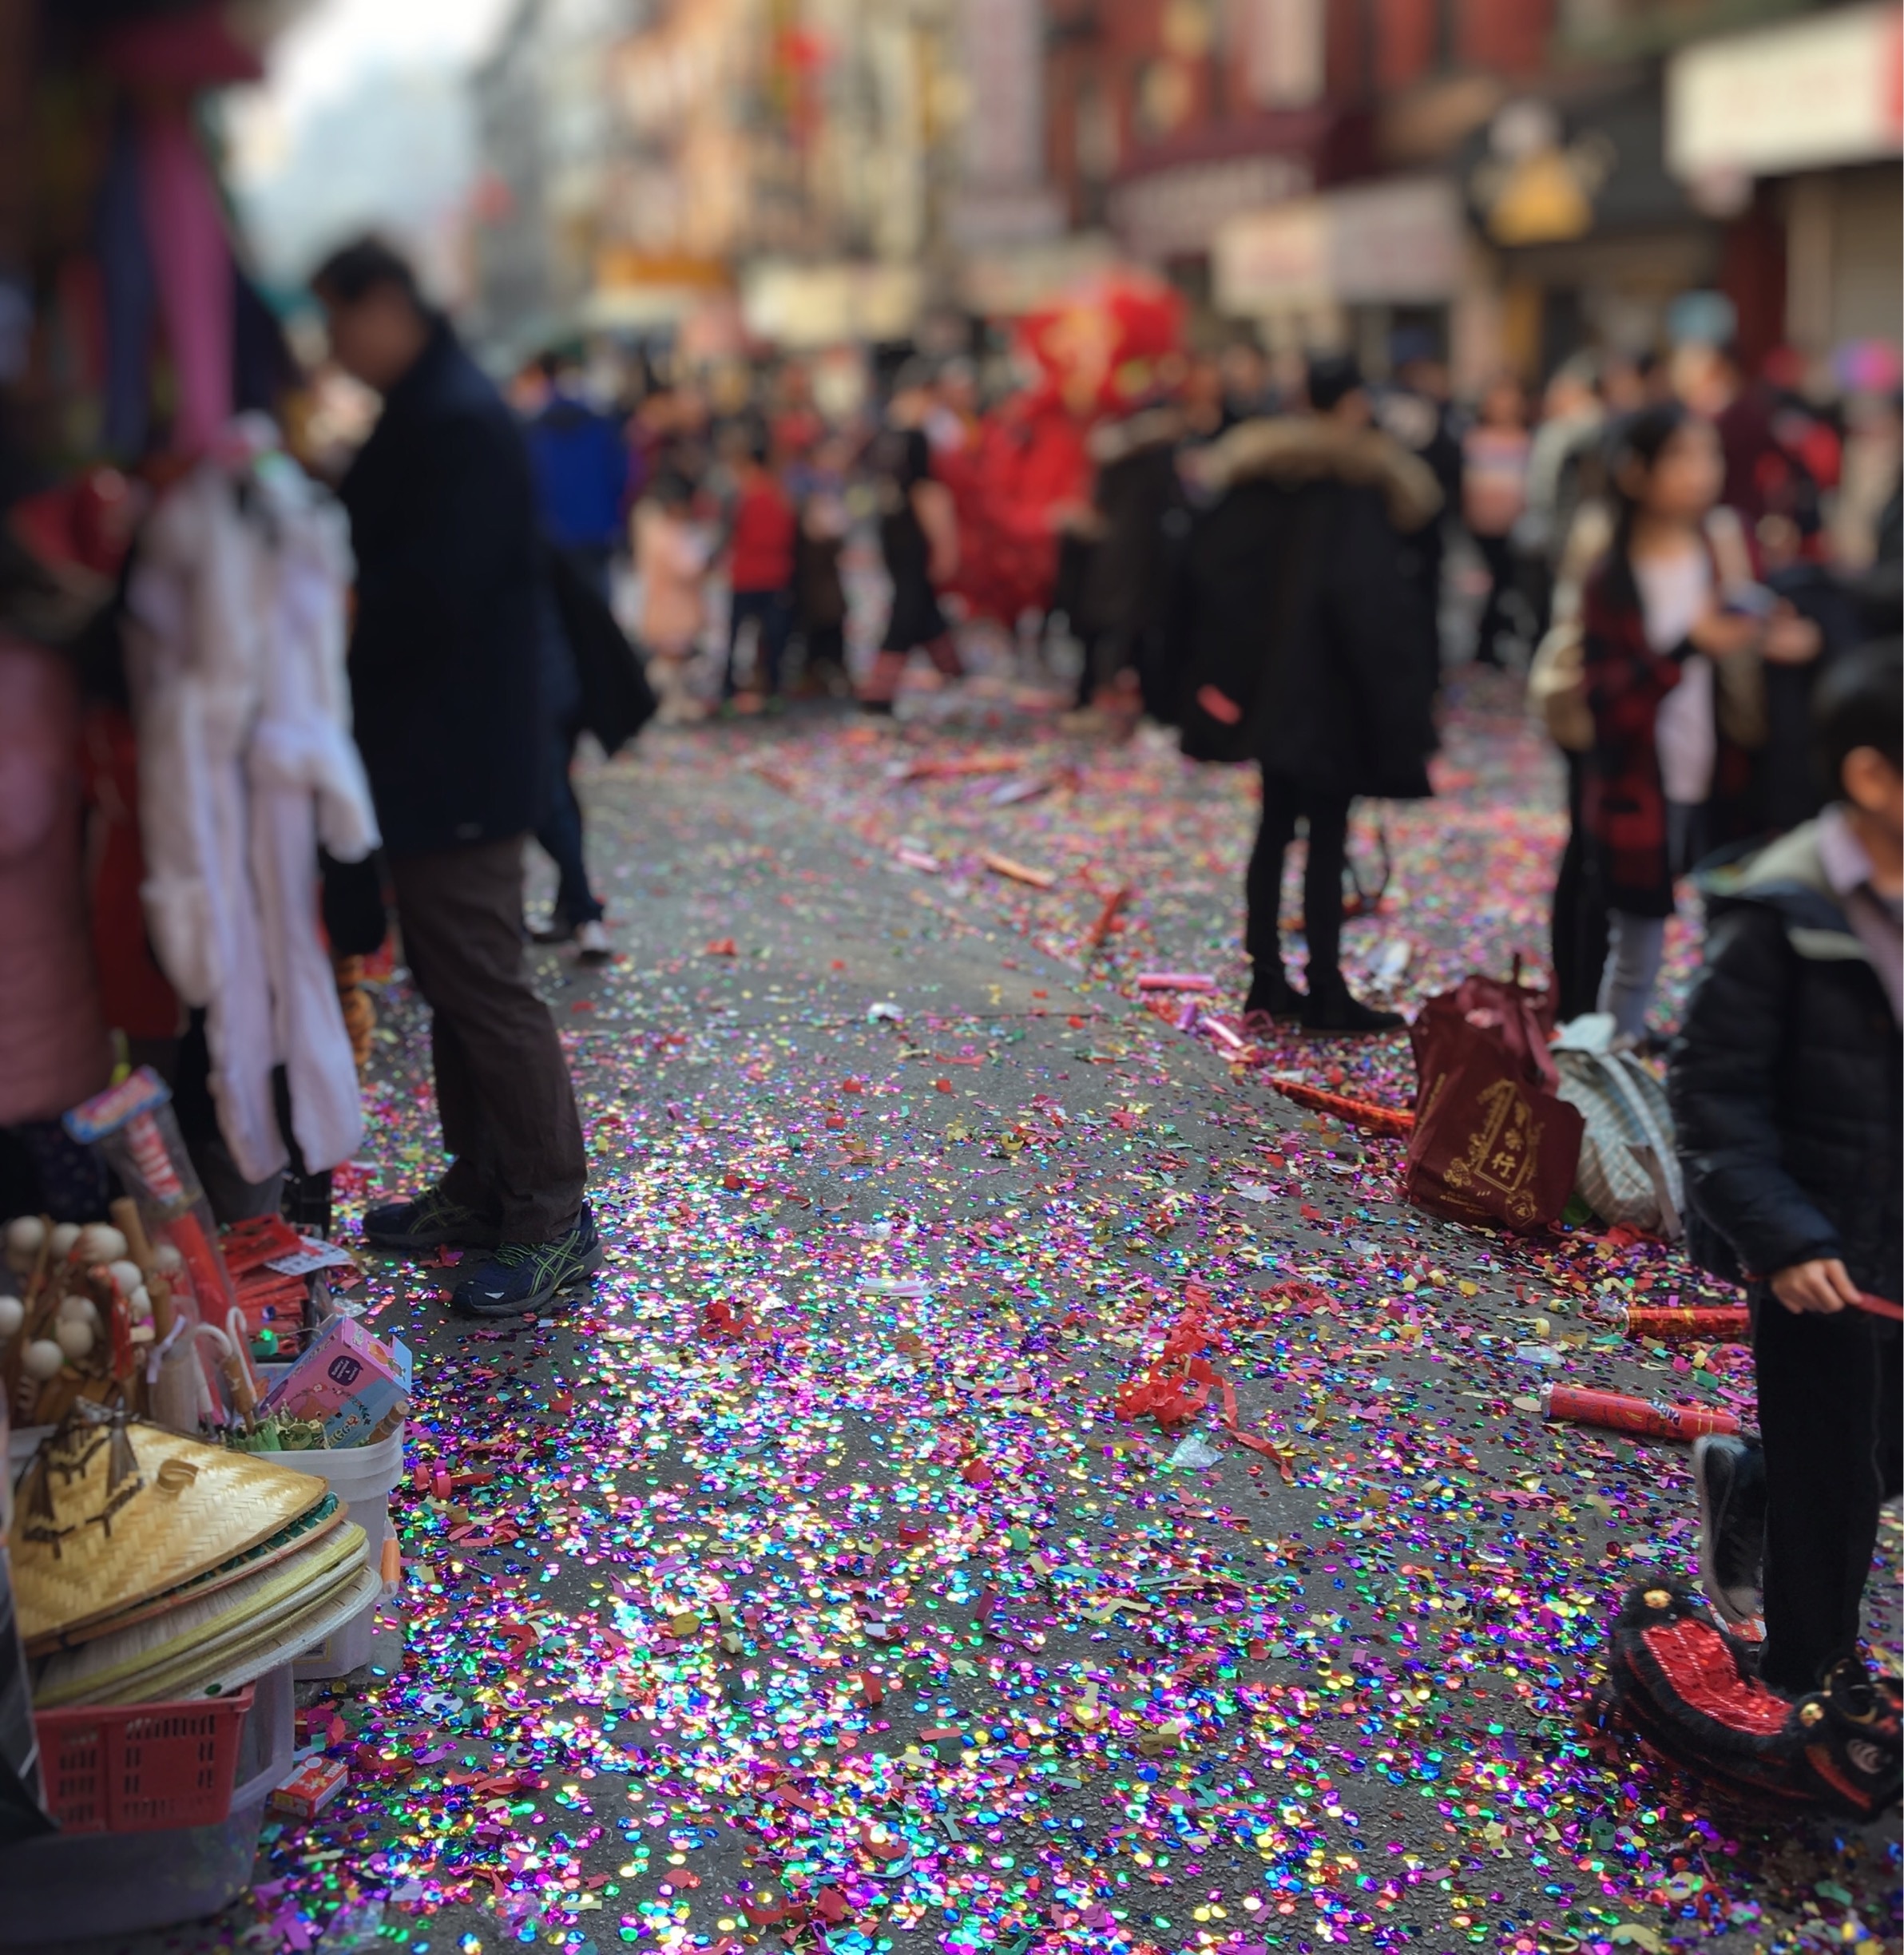 More lunar new year celebrations. Clearwater with poppers and glitter bombs. #newyork #perspectives #lunarnewyear #ontheroad